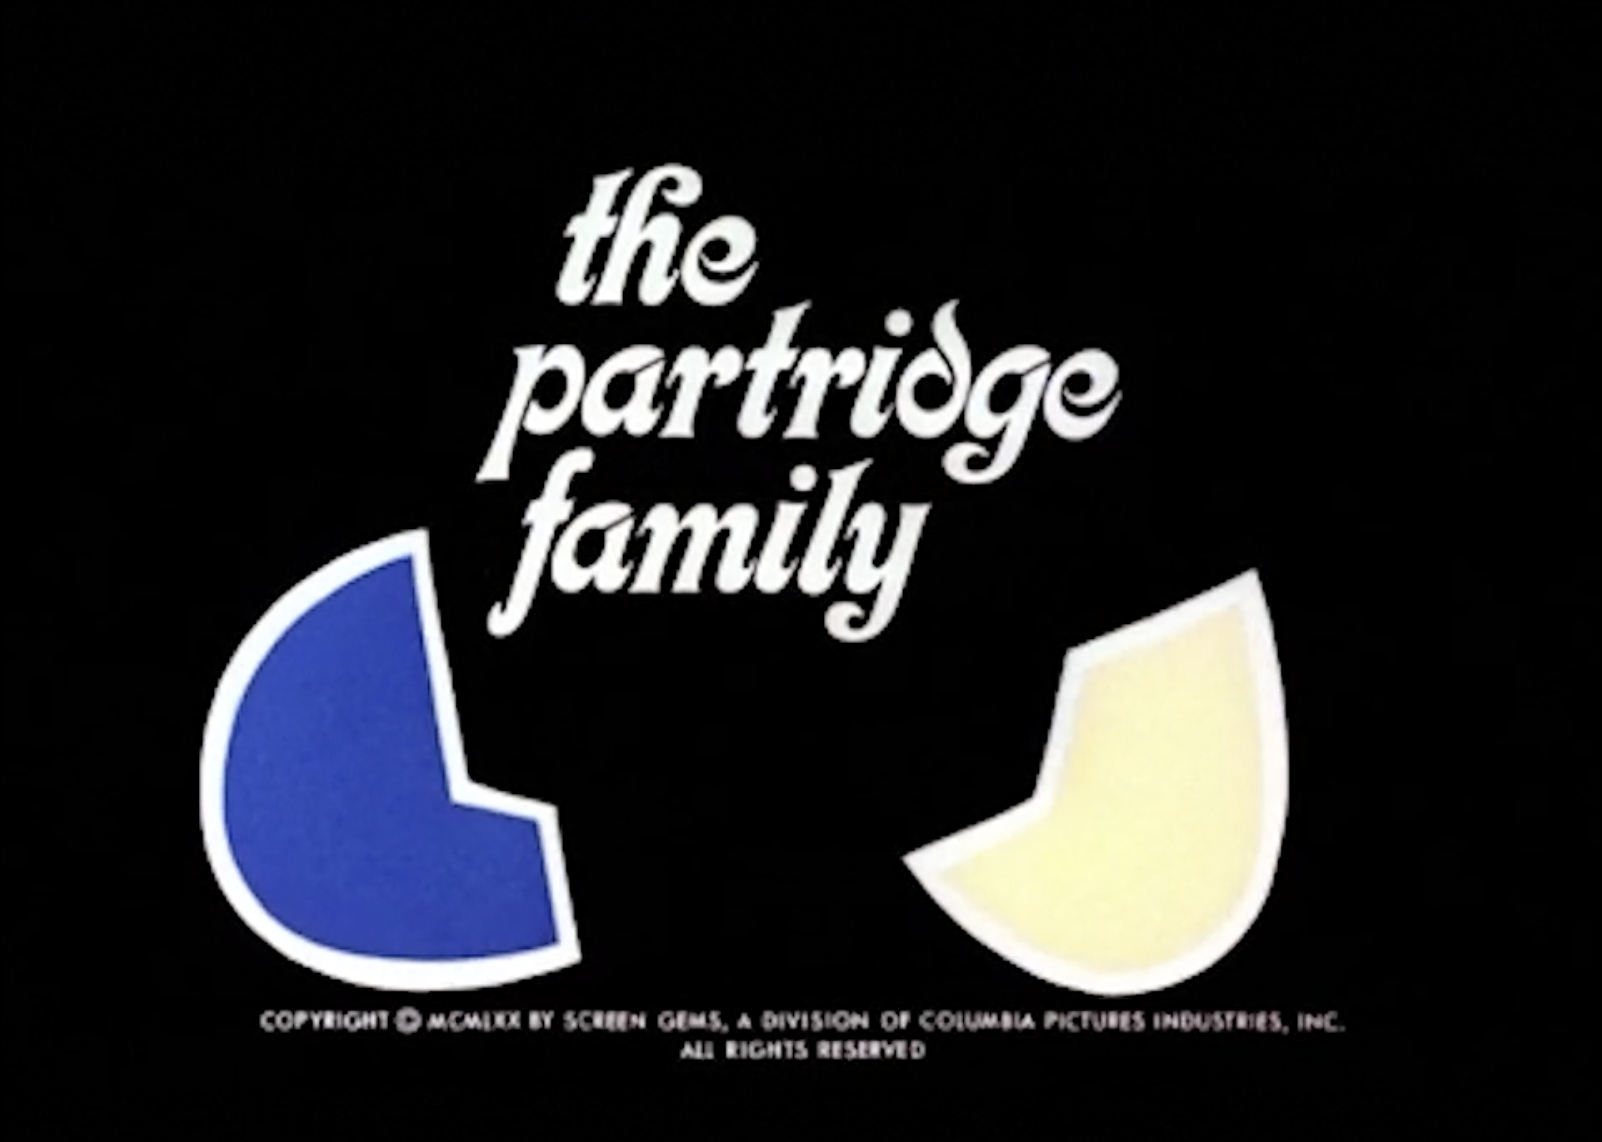 Download The Partridge Family Font